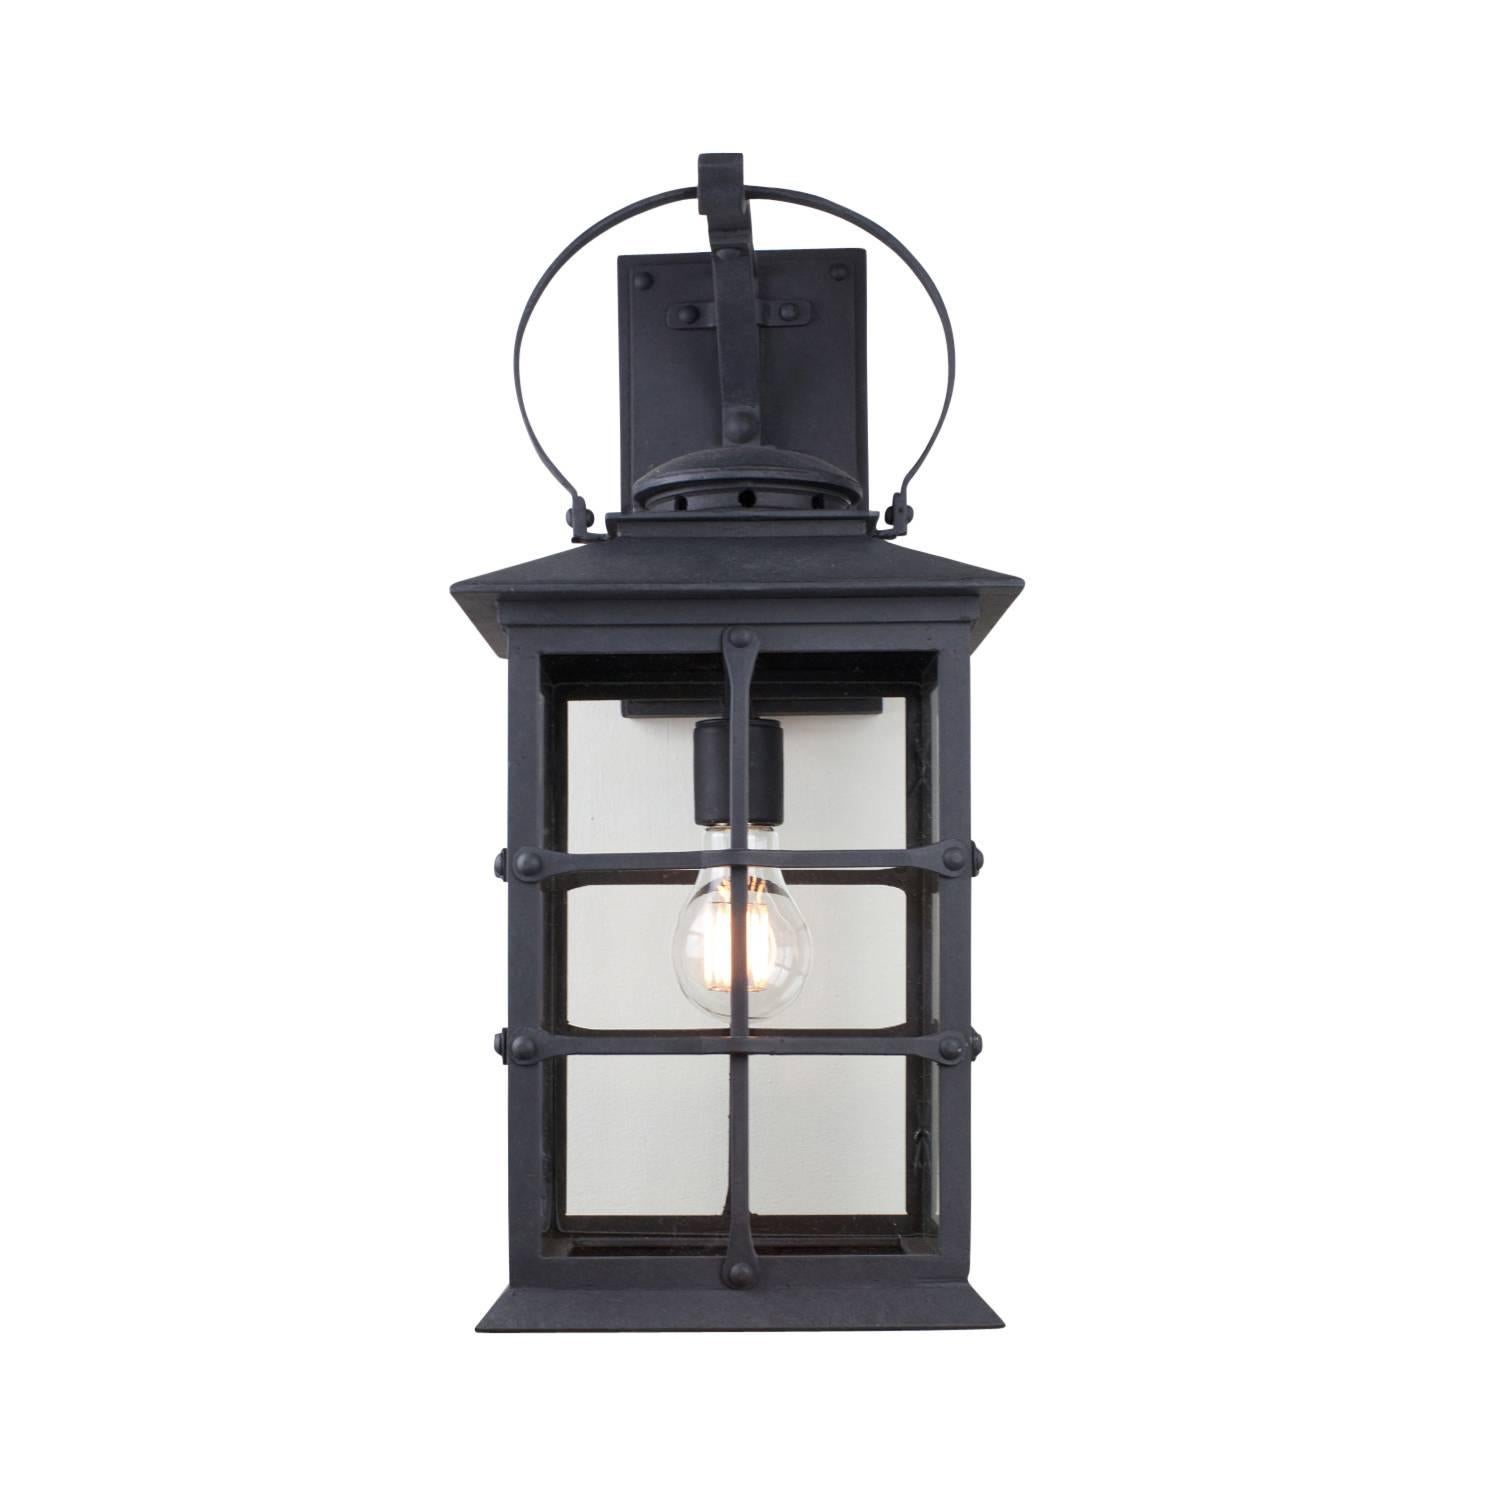 Built over 220 years ago, the historic Santa Barbara Mission displays the unpretentious adobe style of American Colonial architecture. Emulating its timeless look, our Mission inspired lantern has clean lines, detailed top, and a timeless look.